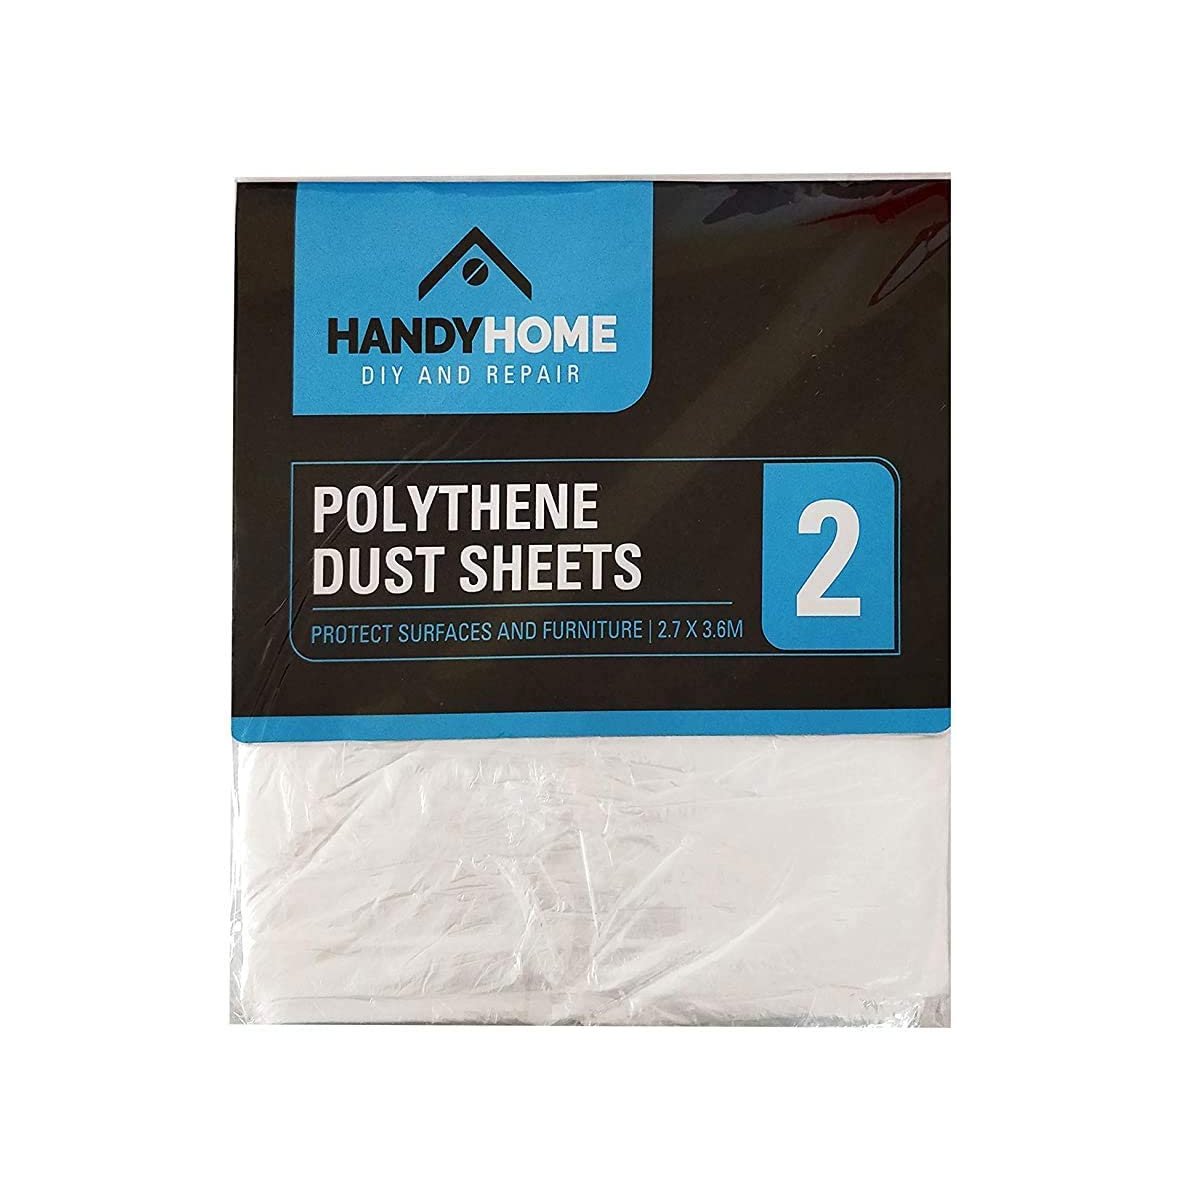 Painting-DIY-Polythene-Dust-Sheets-(Pack-of-2)